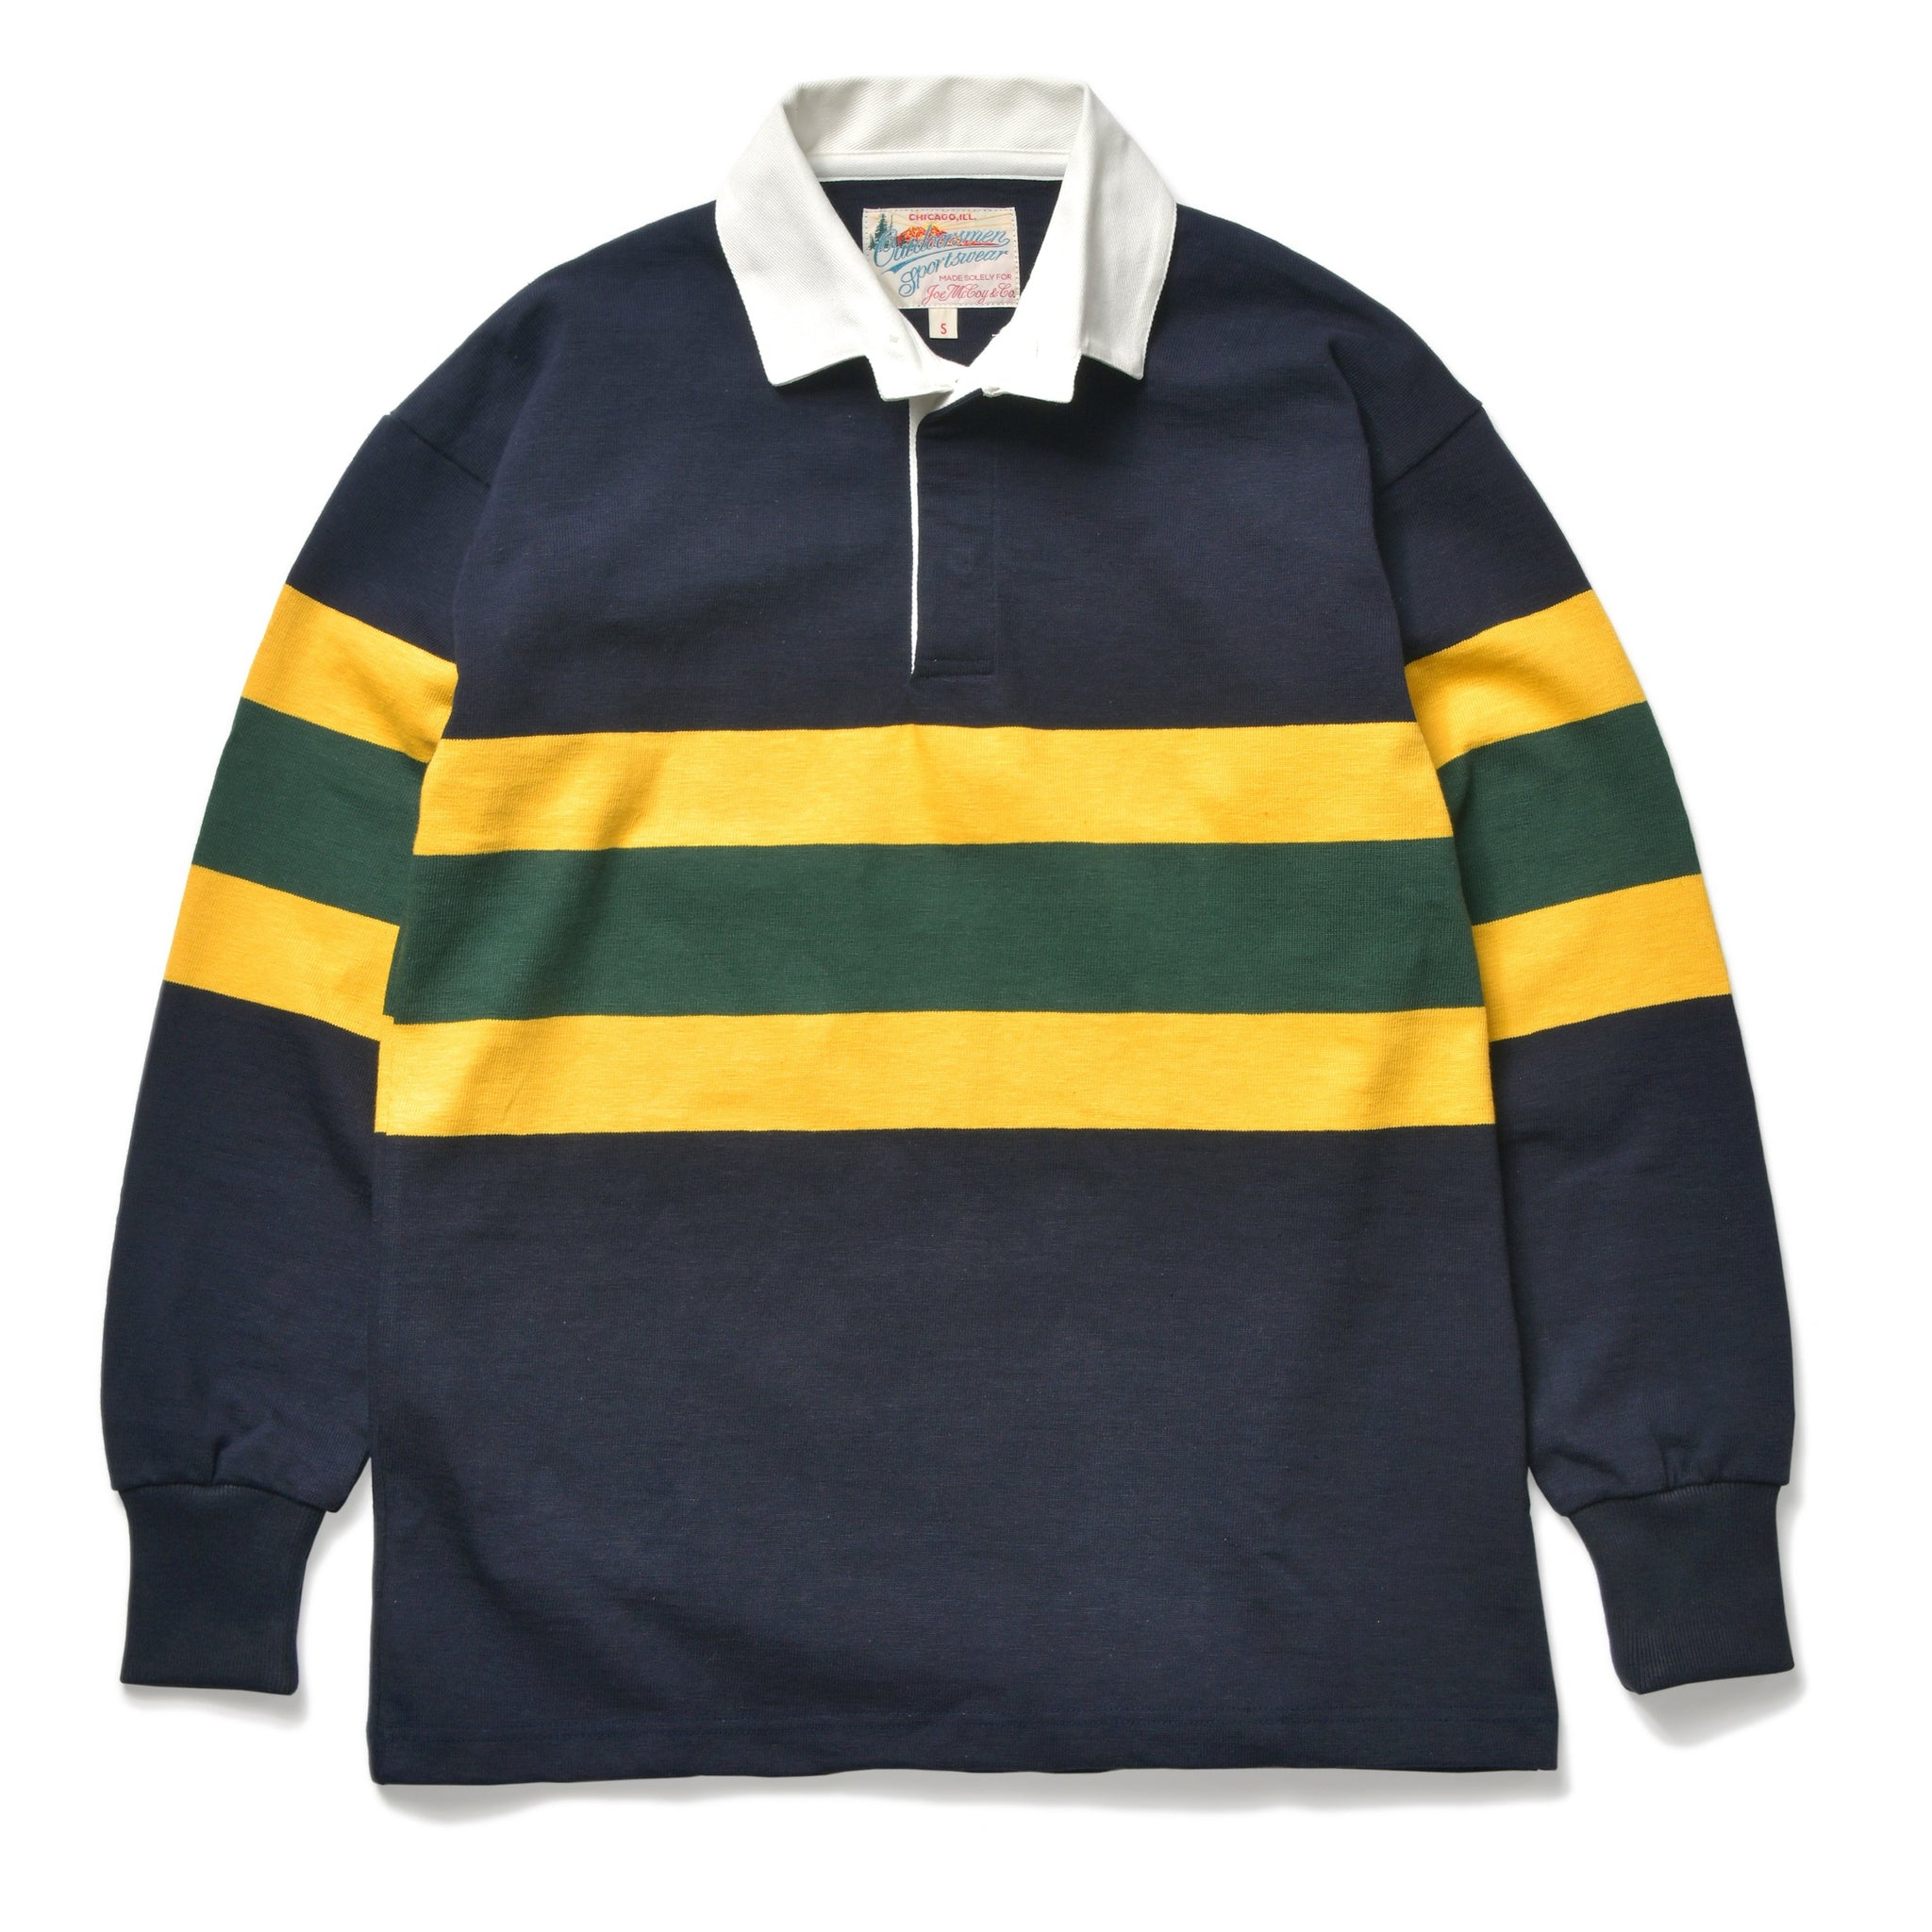 CLIMBERS' STRIPED RUGBY SHIRT – The Real McCoy's